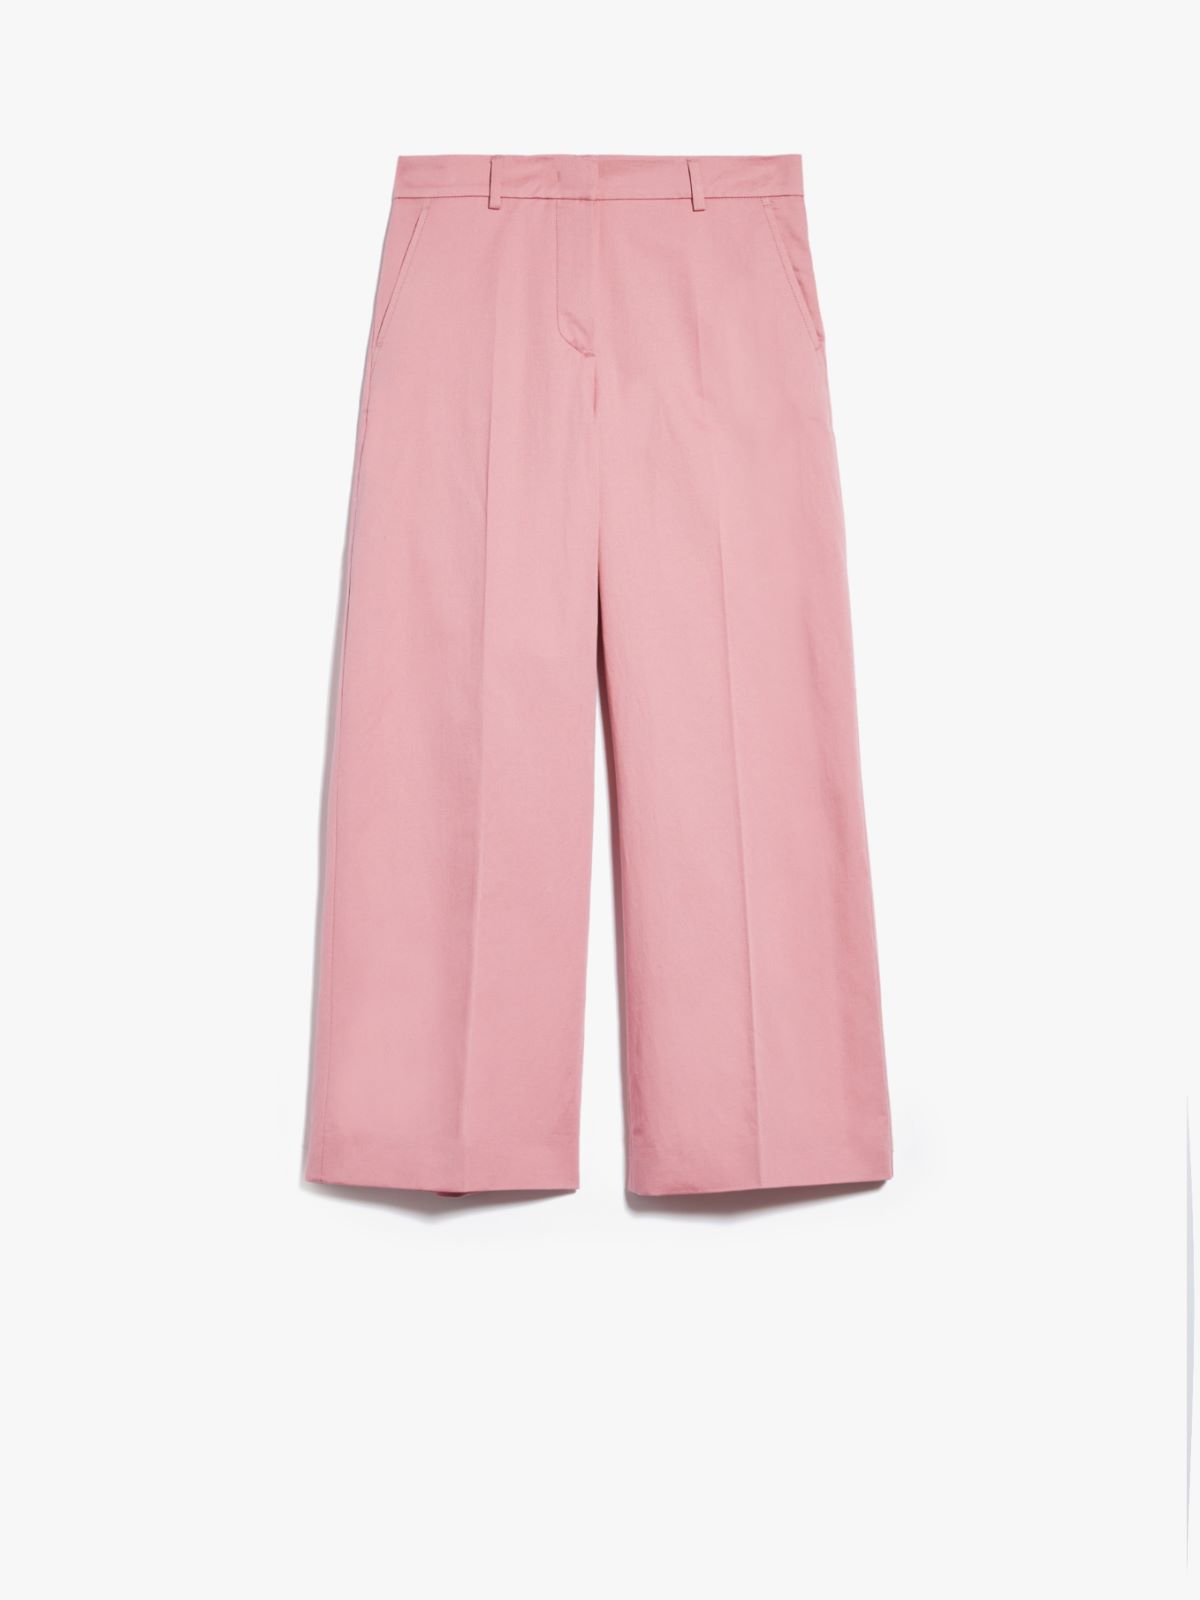 Cotton and linen trousers - PINK - Weekend Max Mara - 5